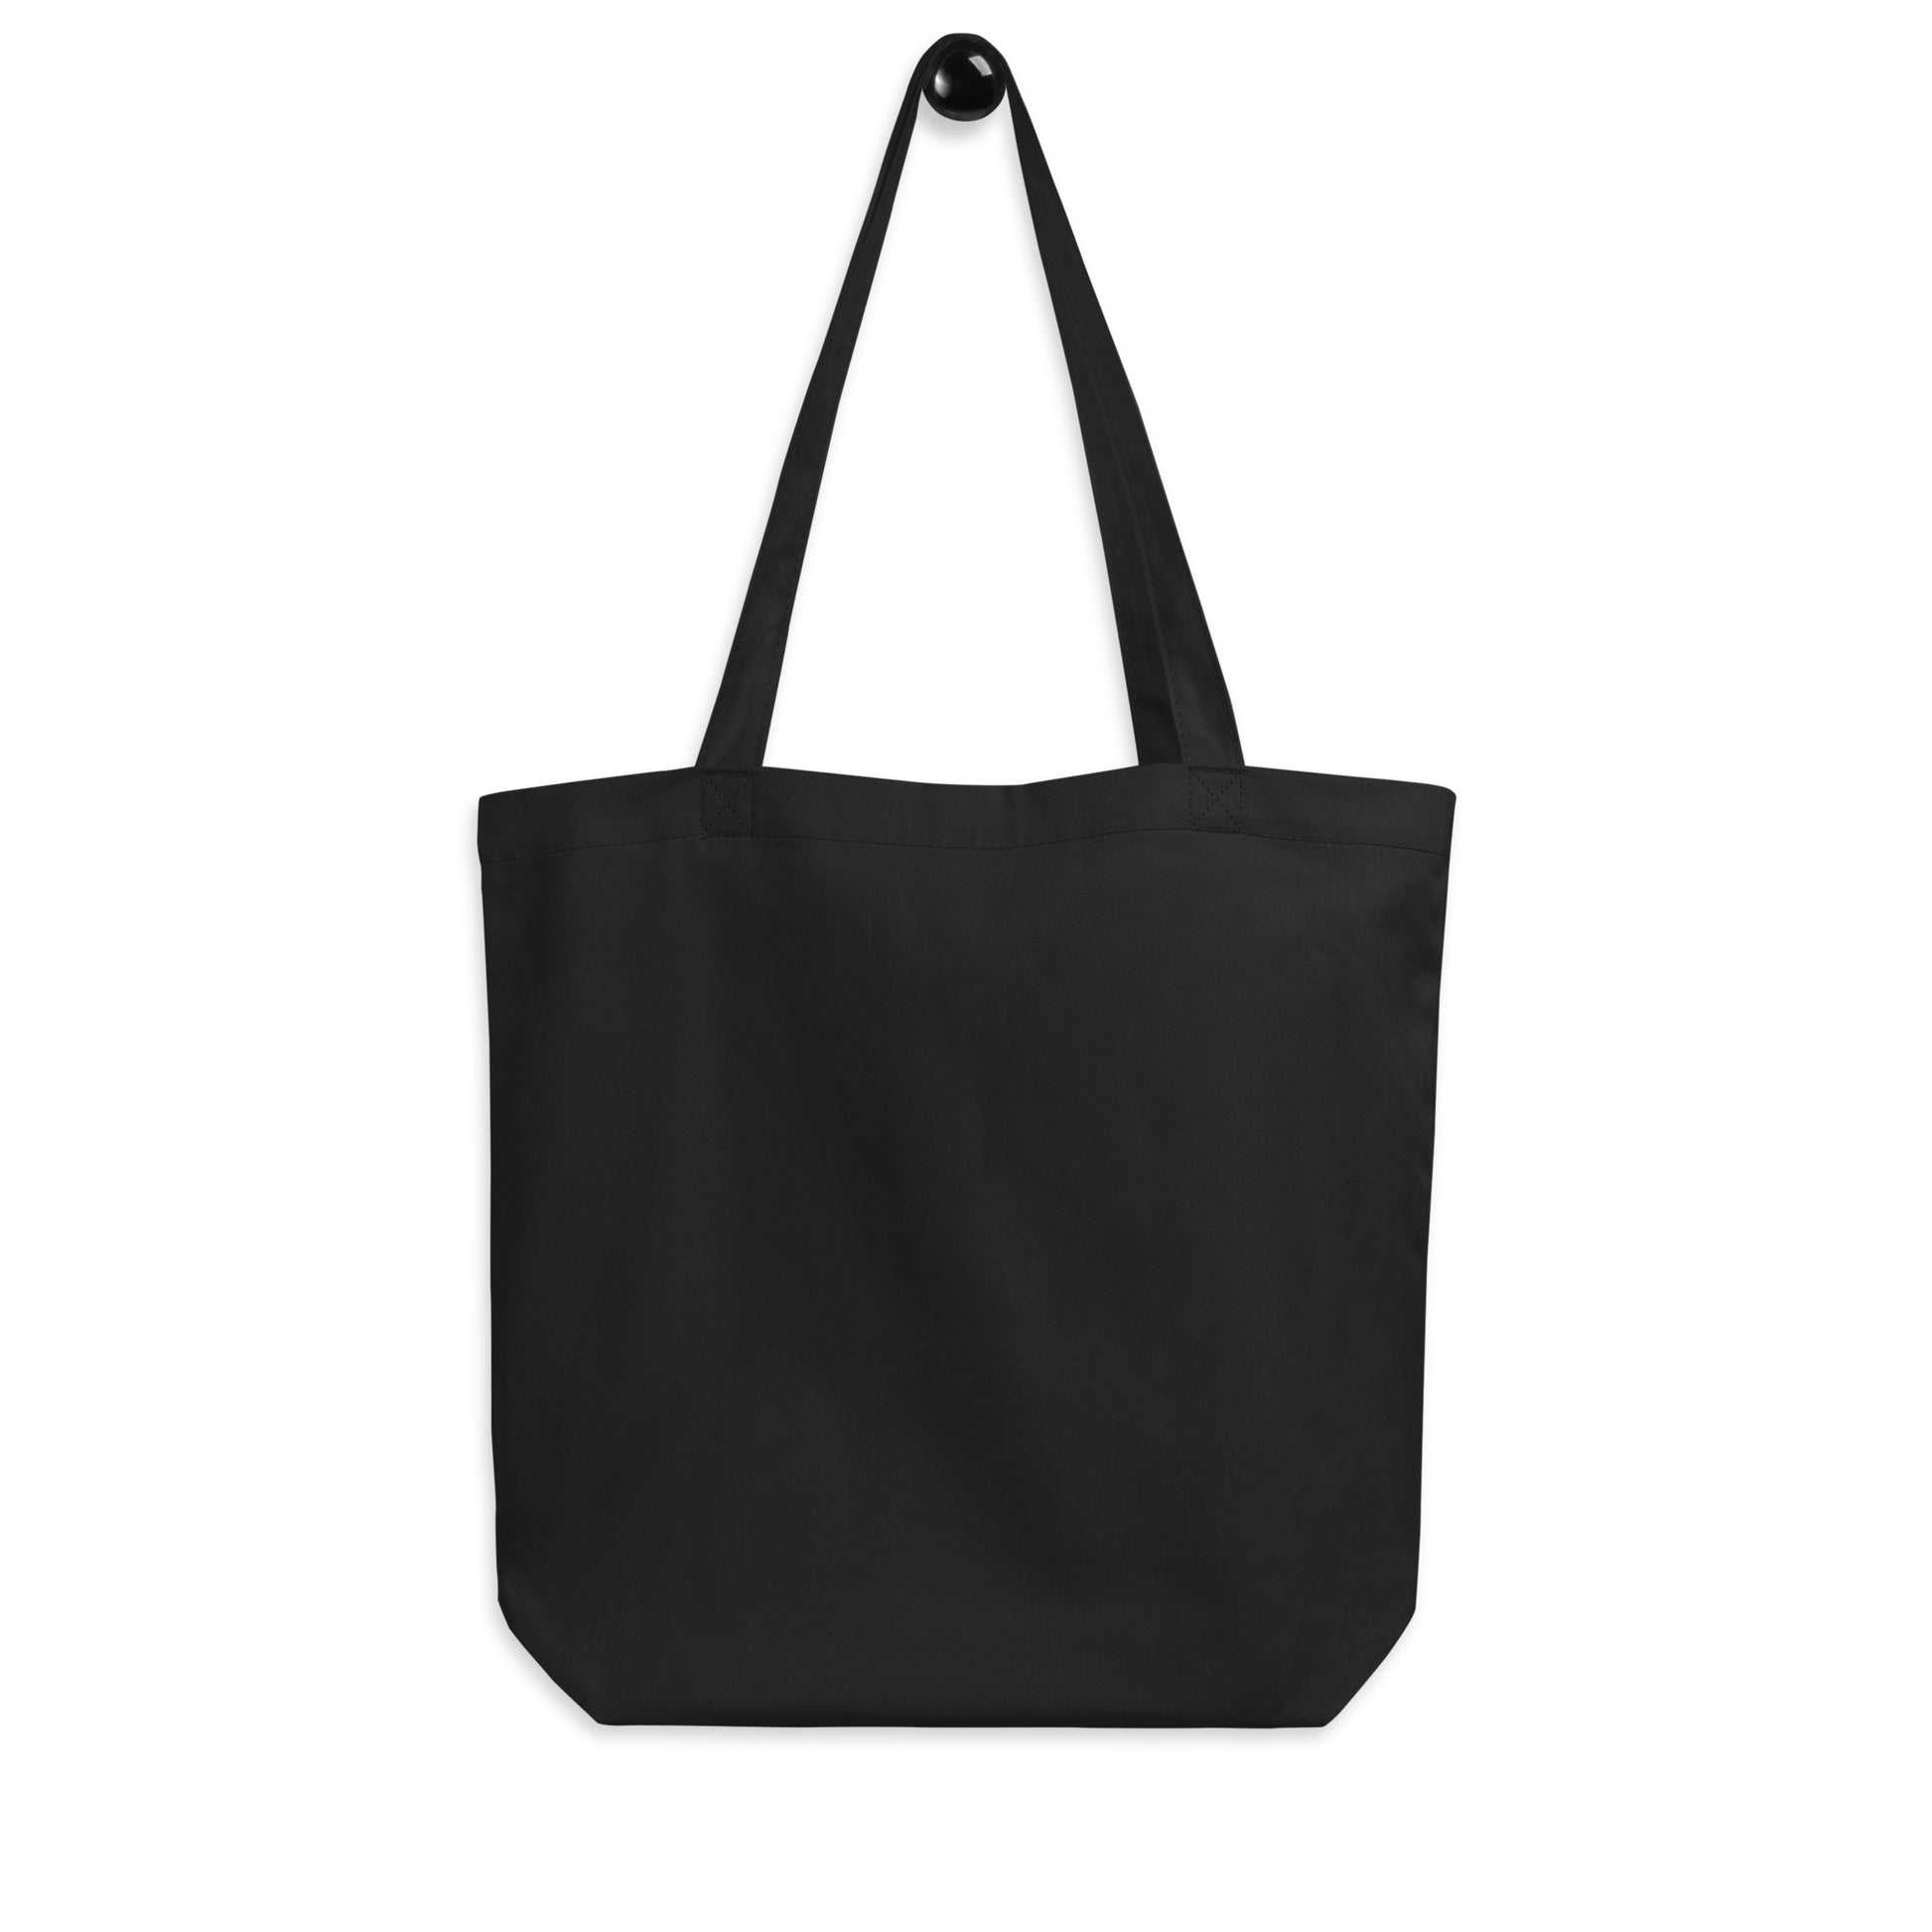 Unique Travel Gift Organic Tote - White Oval • ICN Seoul • YHM Designs - Image 05